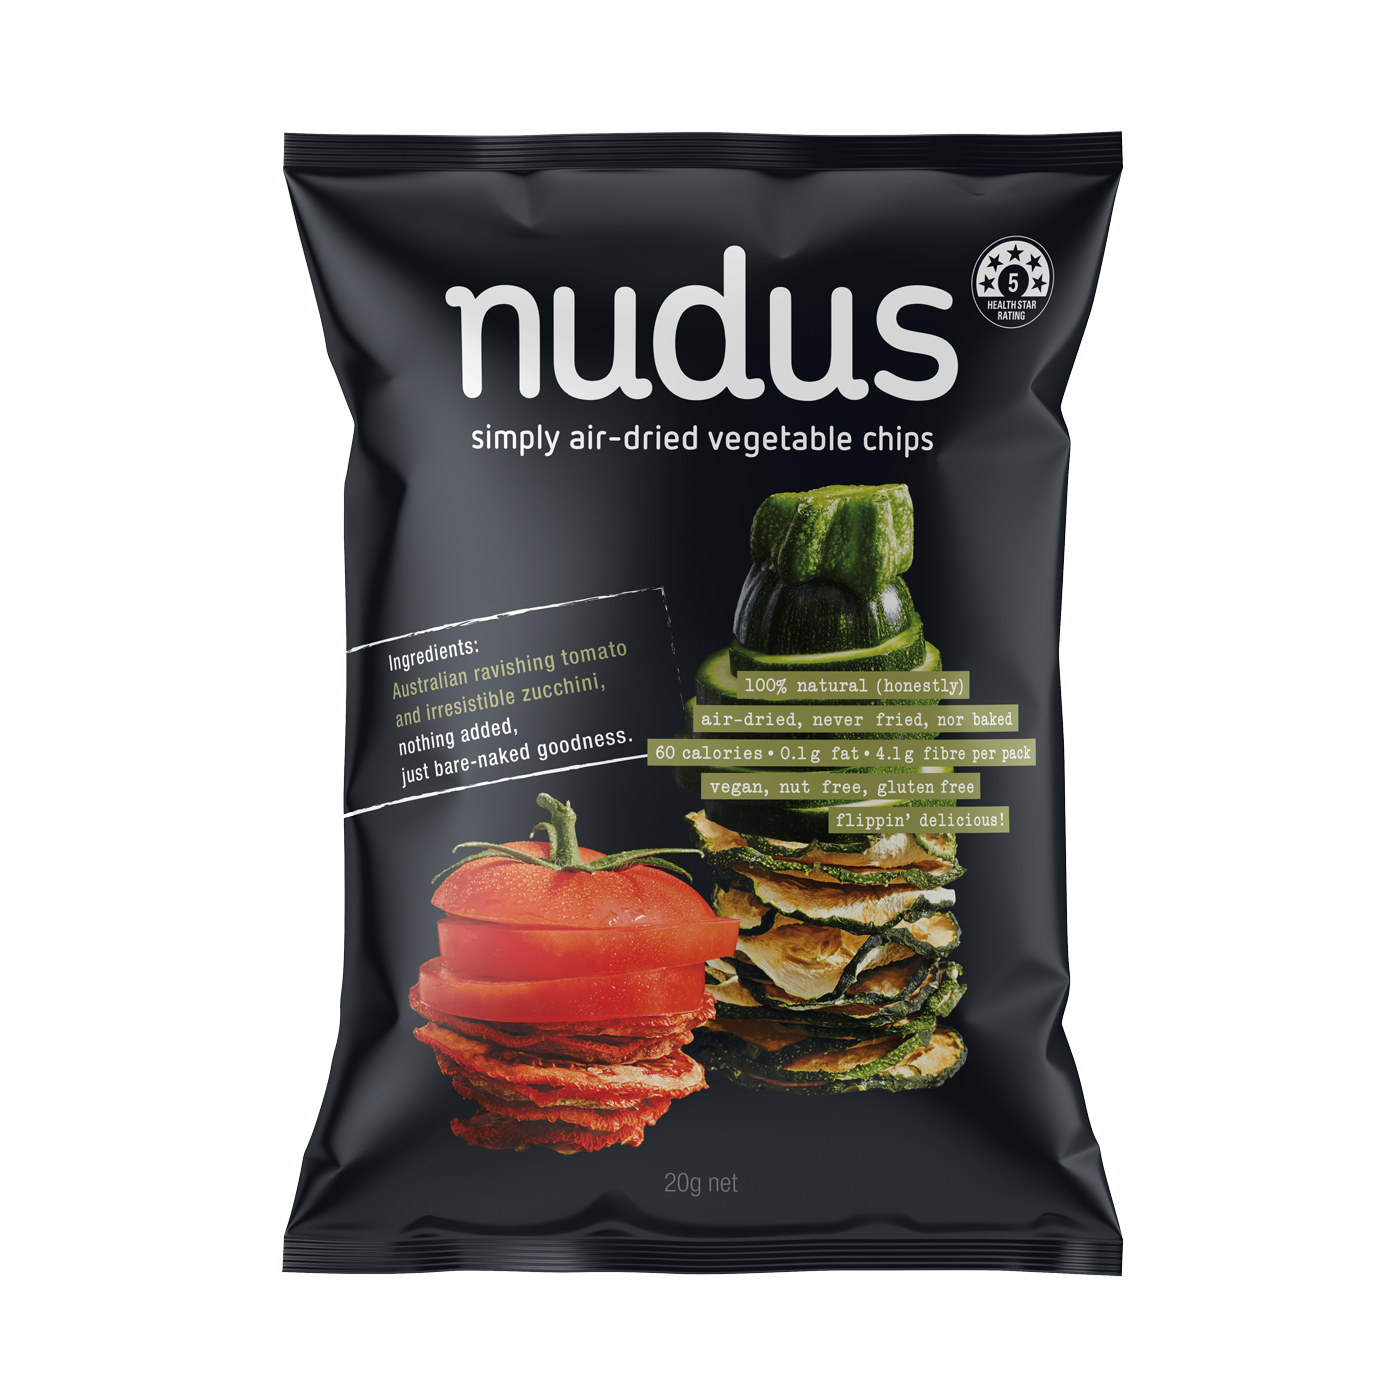 Our Favorites From Nudus